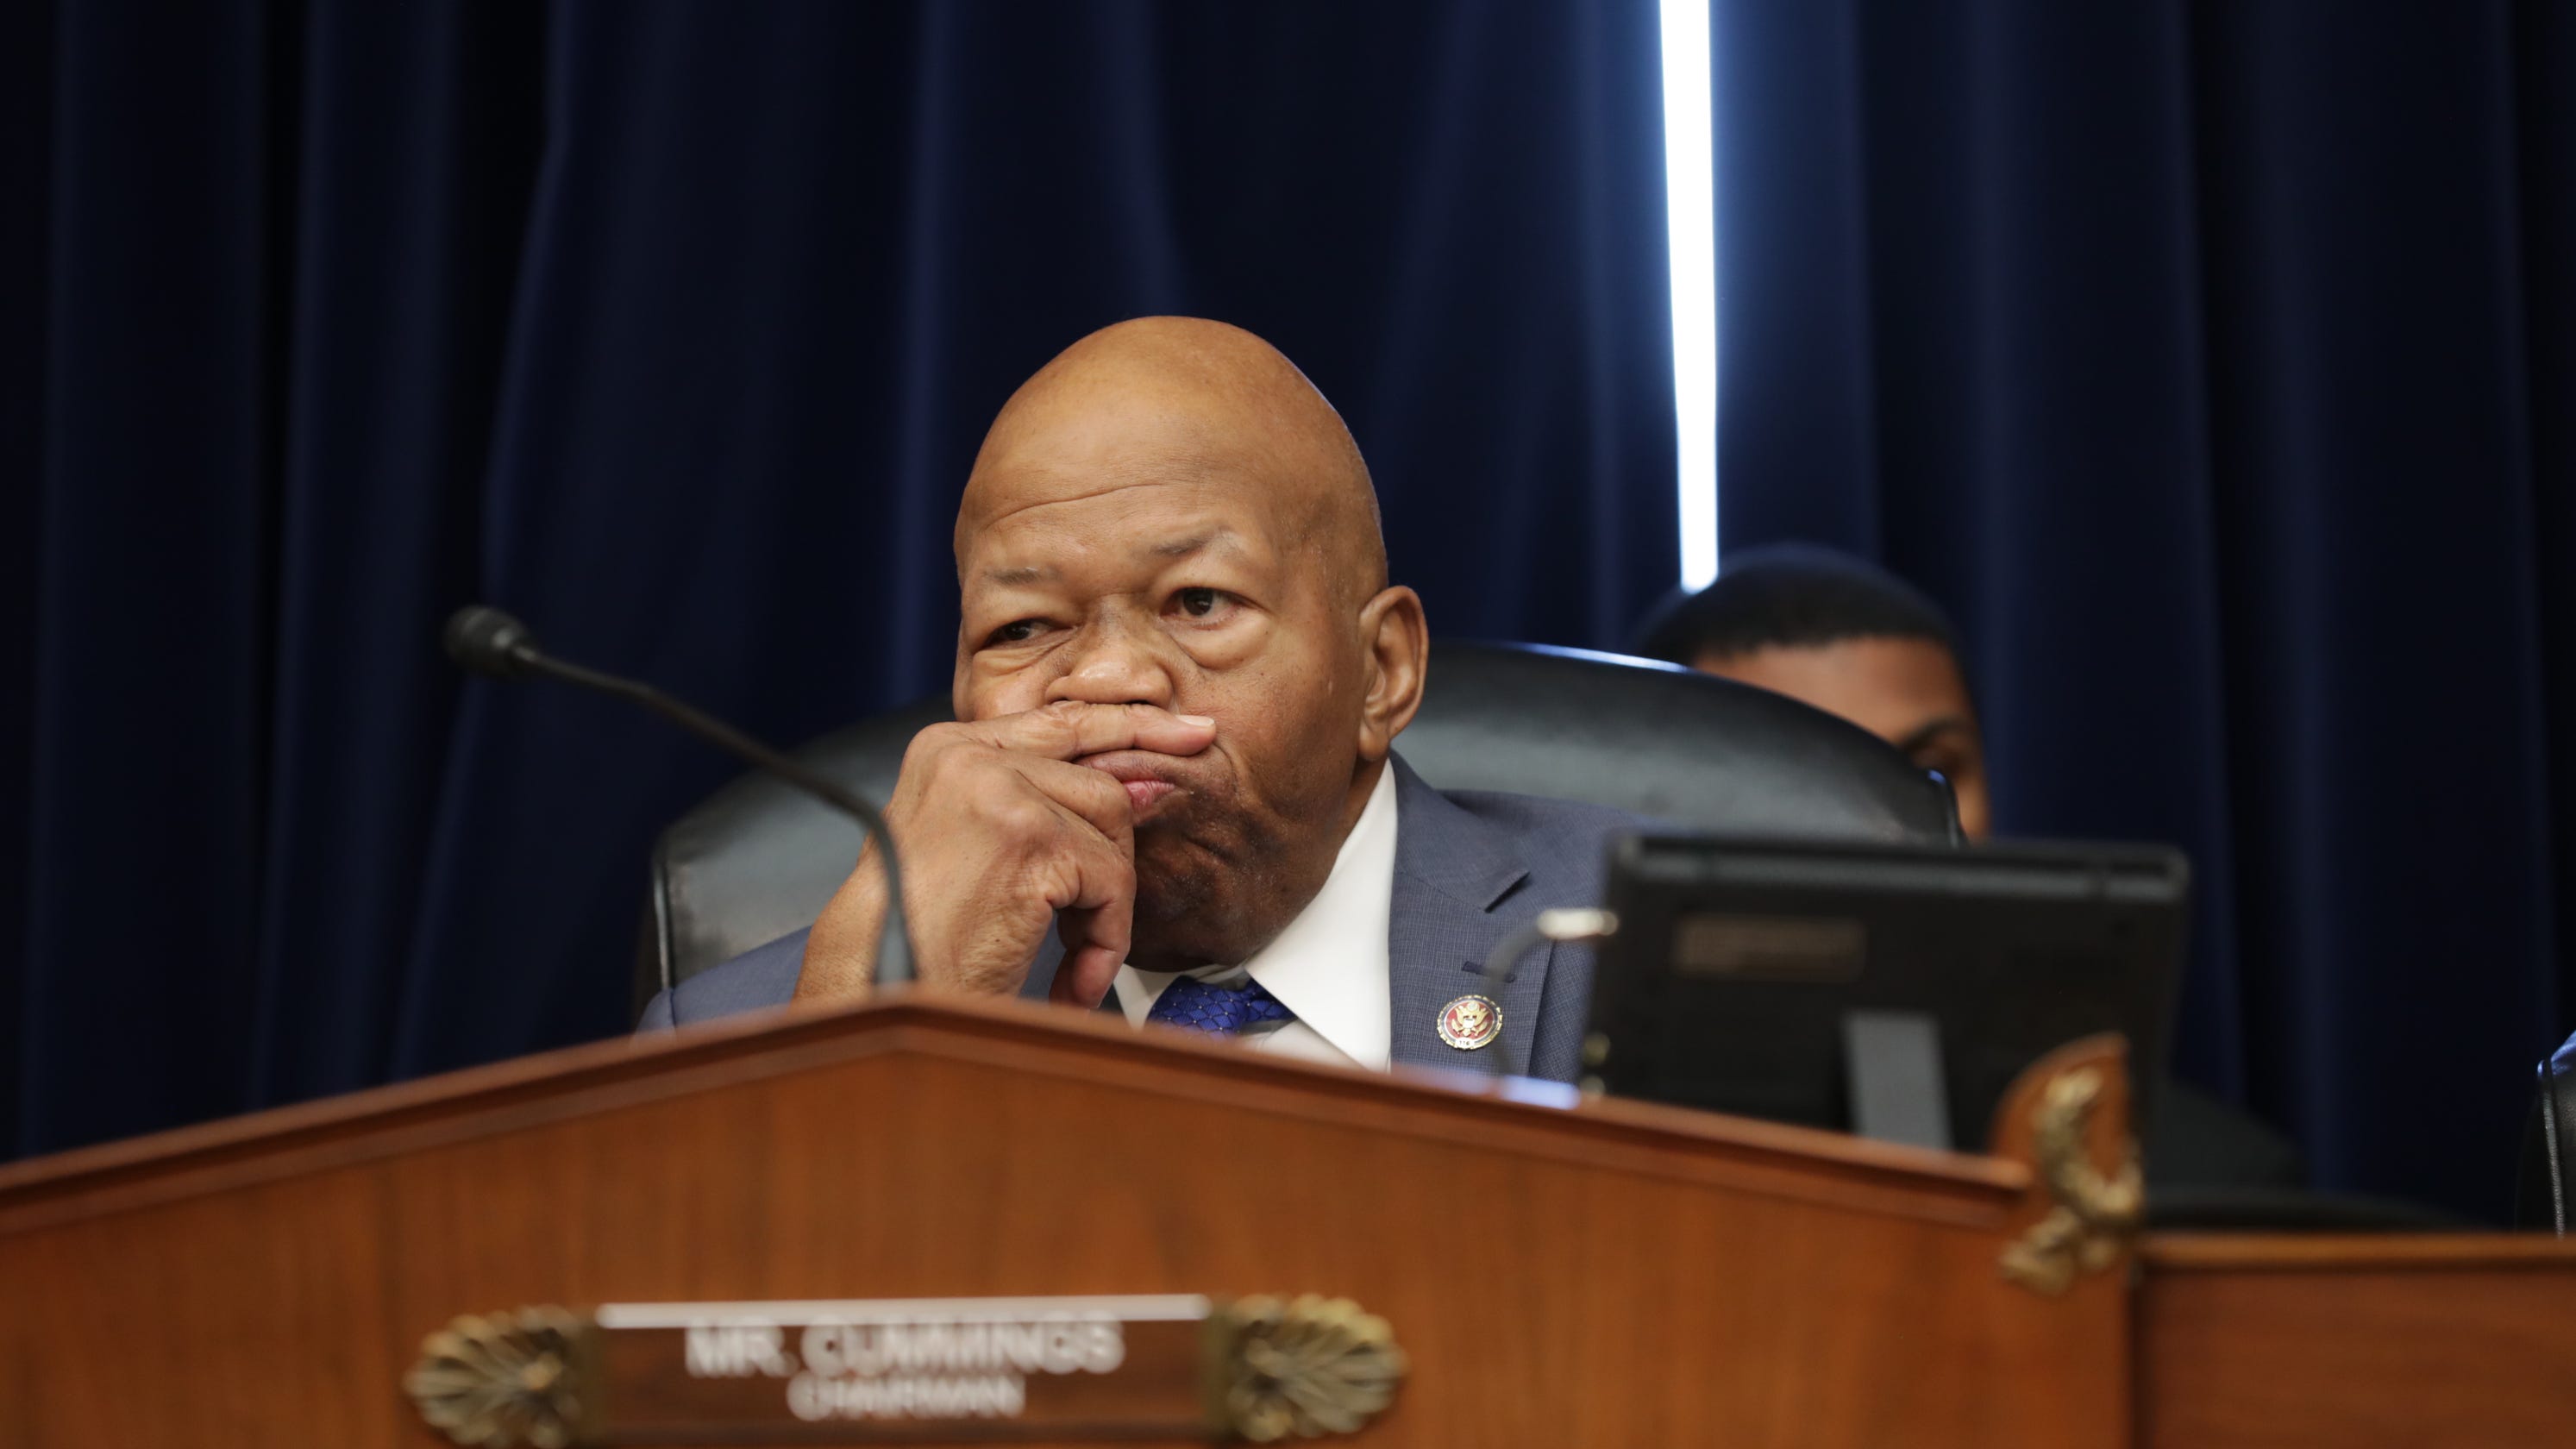 Michael Cohen: Who is Elijah Cummings, chair of House Oversight panel?